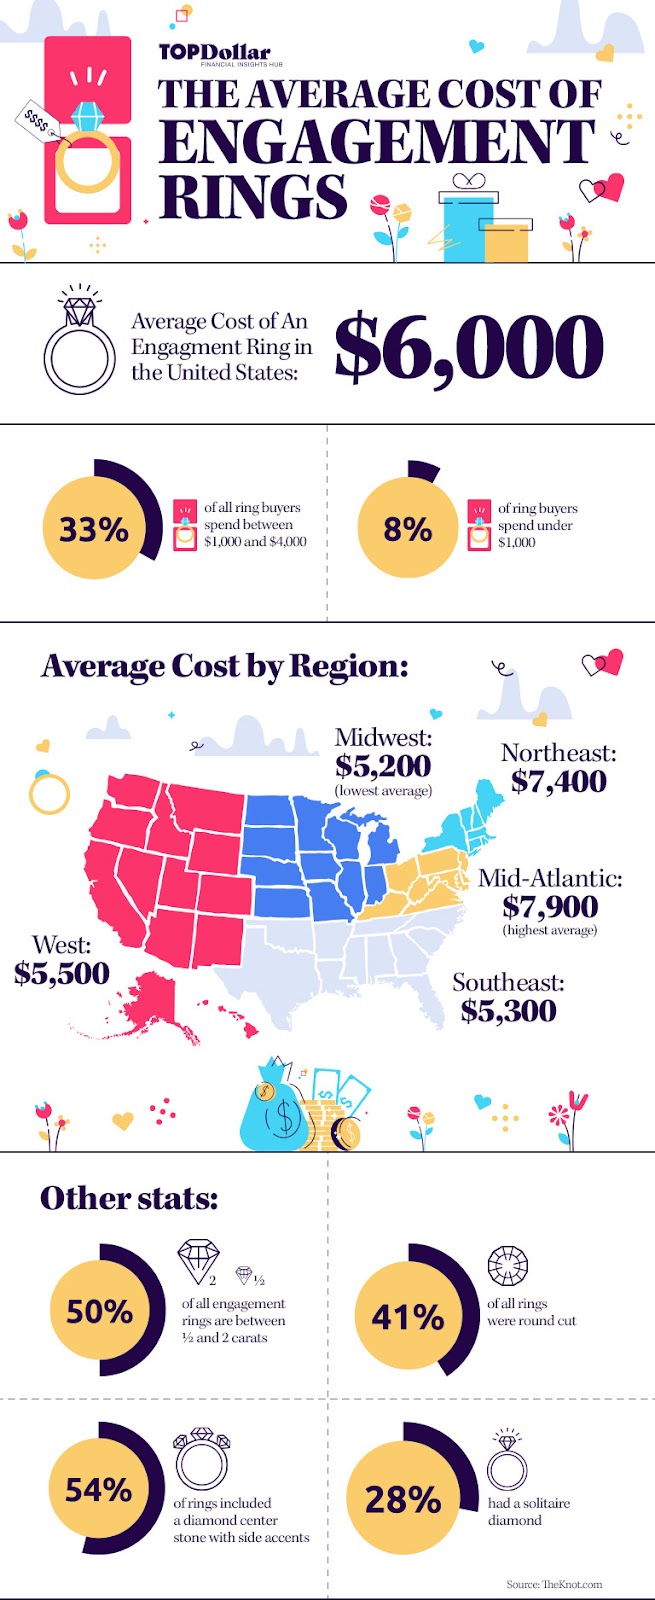 The Average Cost of an Engagement Ring - Top Dollar